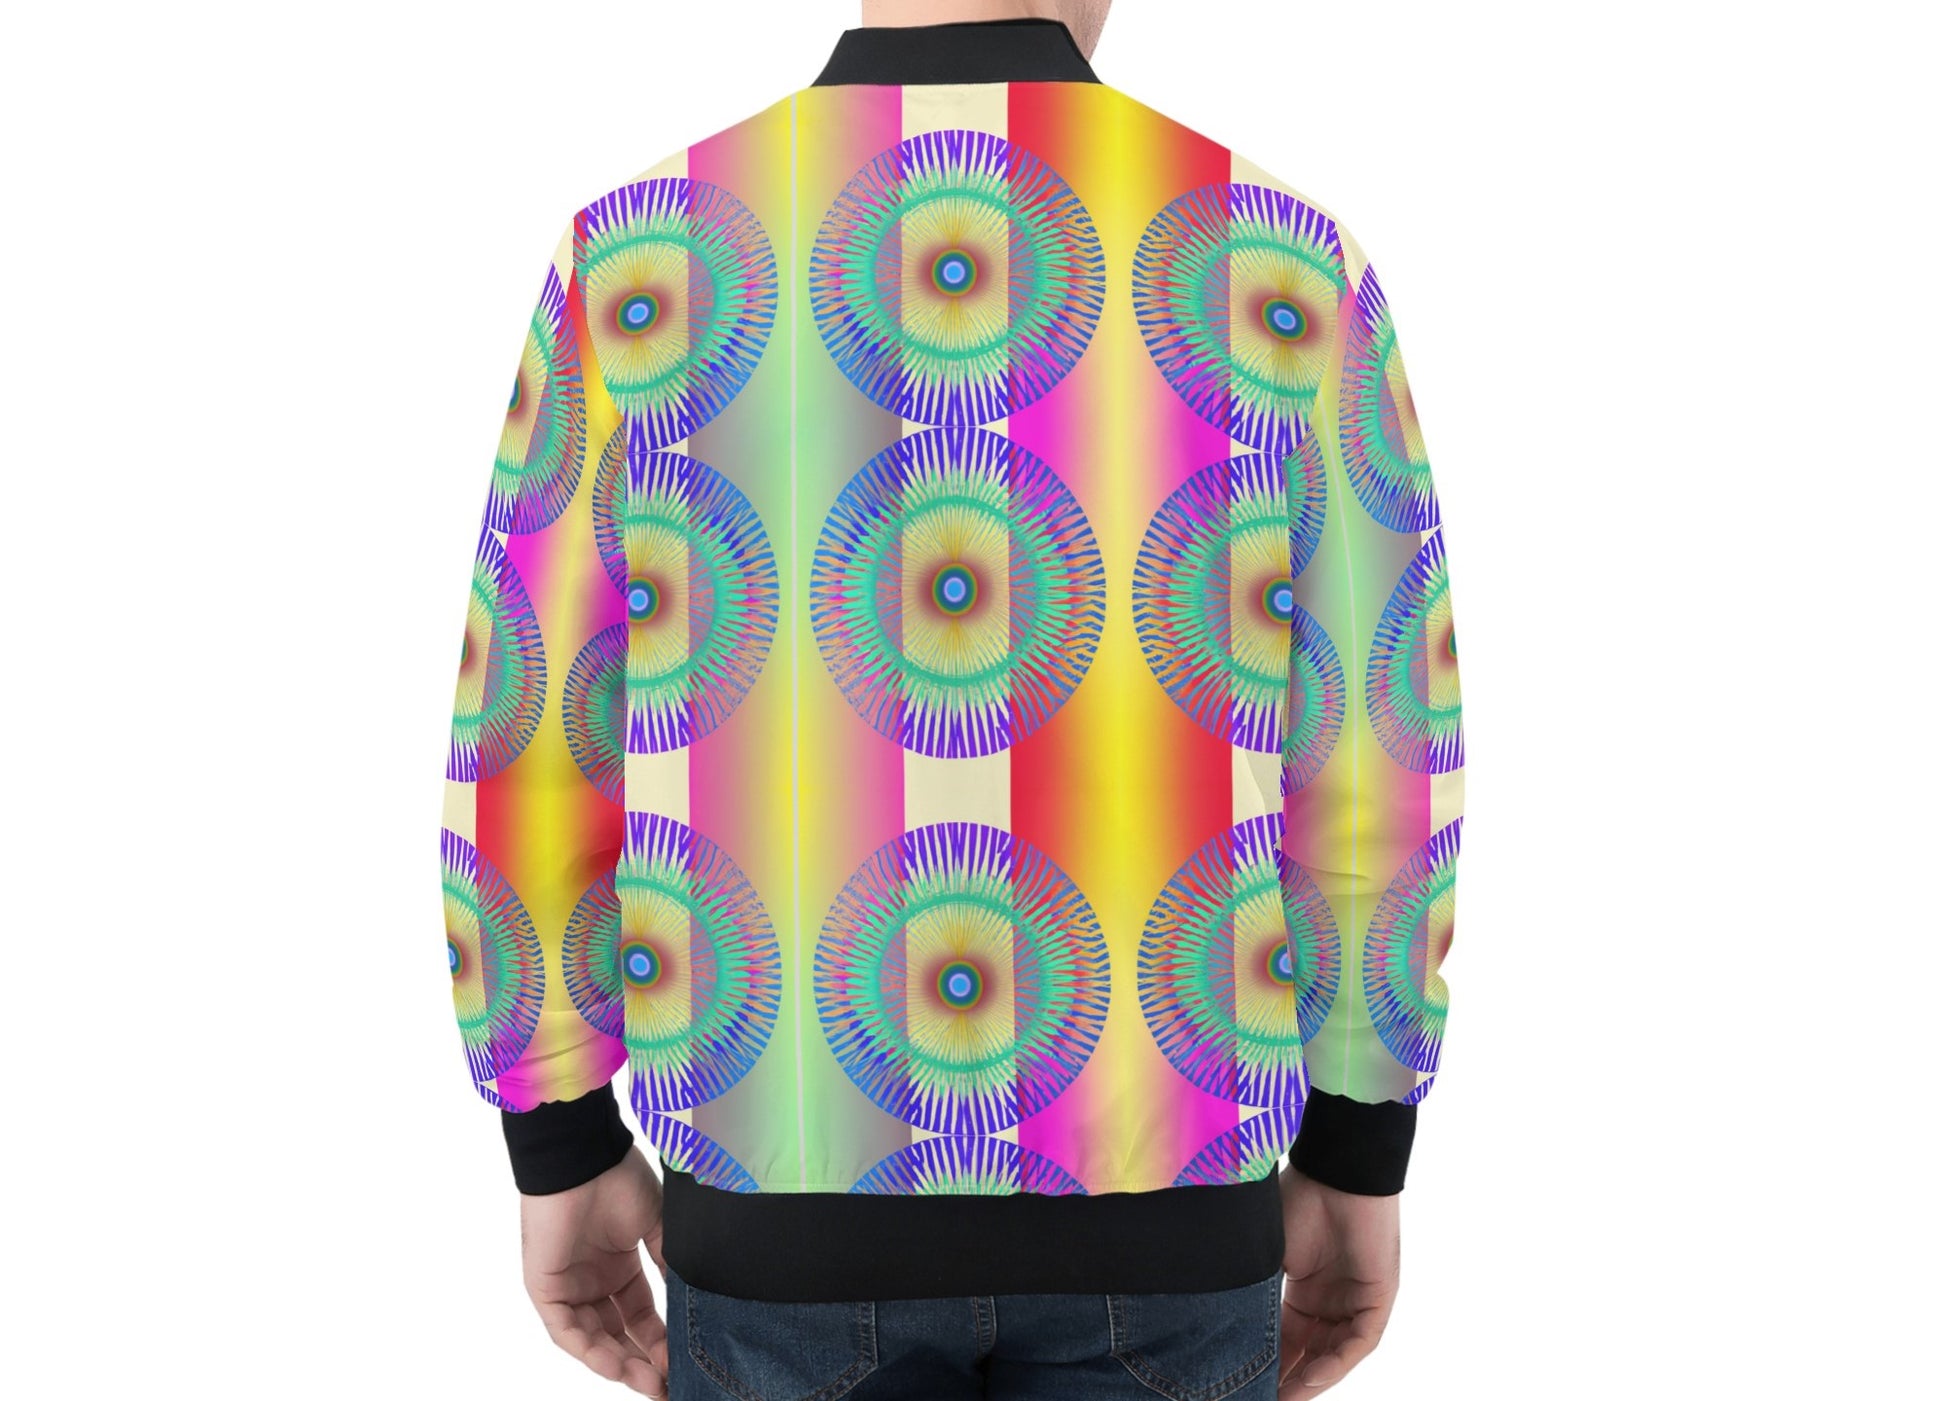 The unique and super bright psychedelic iris design covers the entire garment, adding an extra touch of uniqueness and individuality. It's nice to stand out from the crowd, and this jacket helps you do just that. Crafted with both style and comfort in mind, this bomber jacket is a must-have for those who dare to be different. Embrace the vibrant and captivating vibes of the Psychedelia Iris Men's Bomber Jacket and show off your one-of-a-kind style.